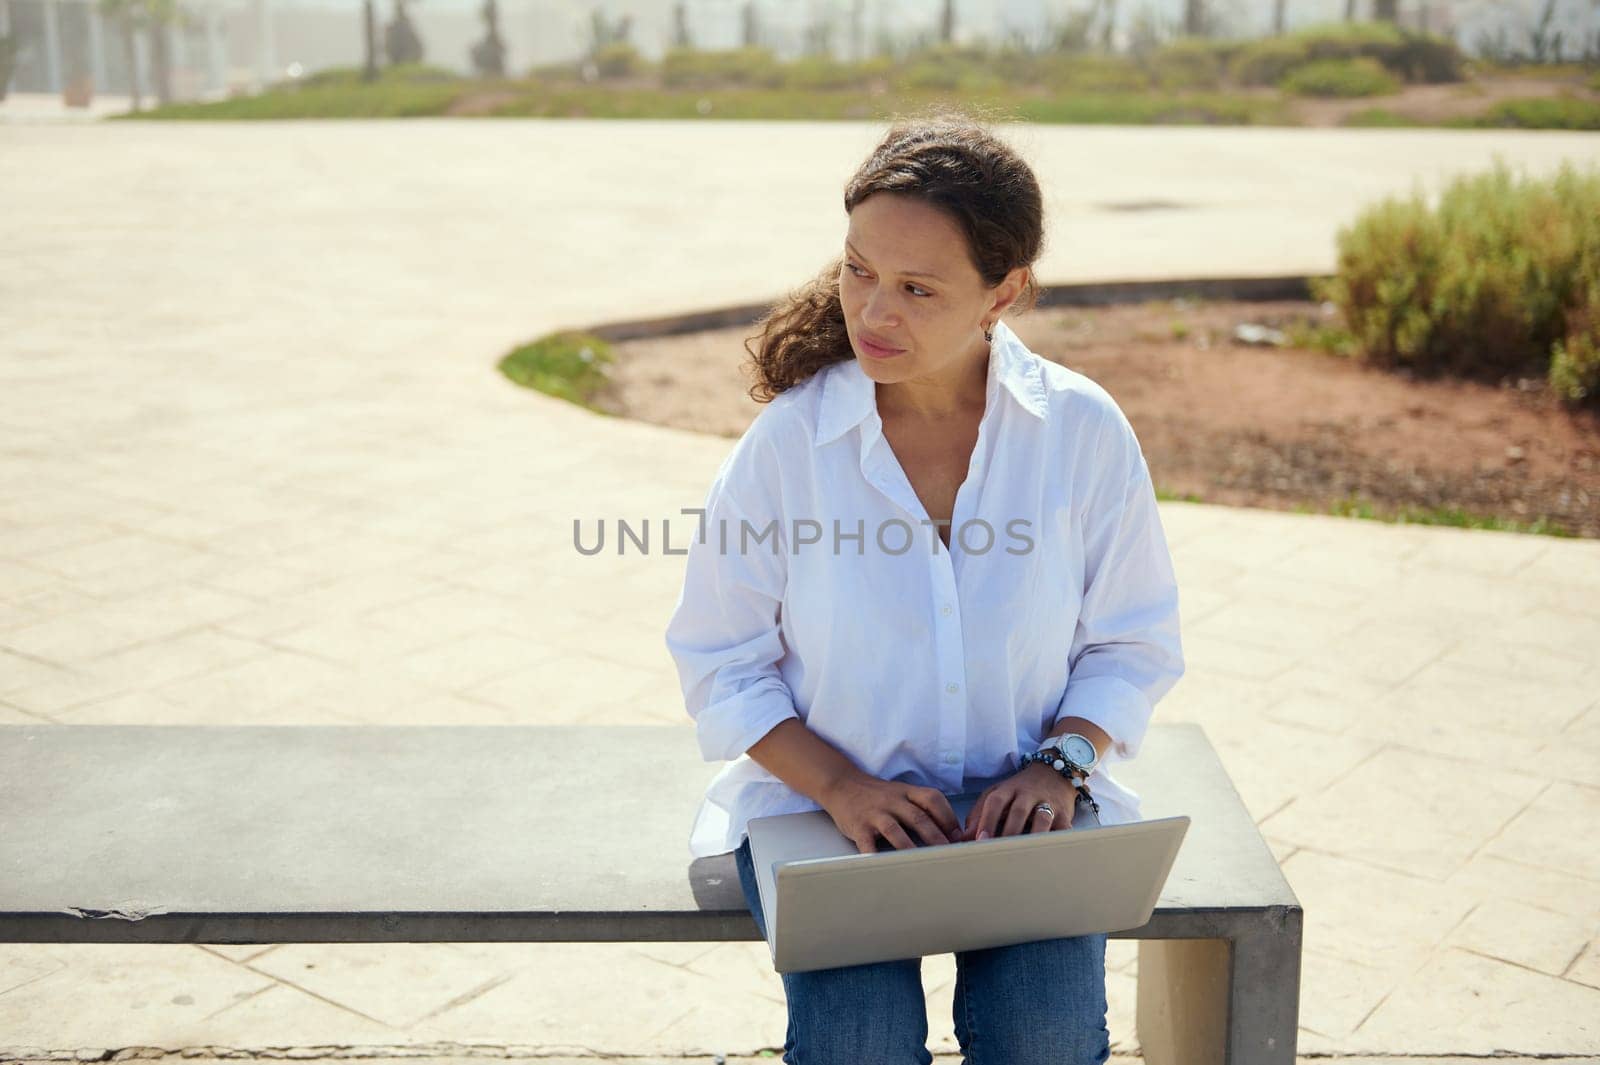 Confident pensive business woman thinking on new startup project, online working on laptop, sitting on bench outdoors by artgf